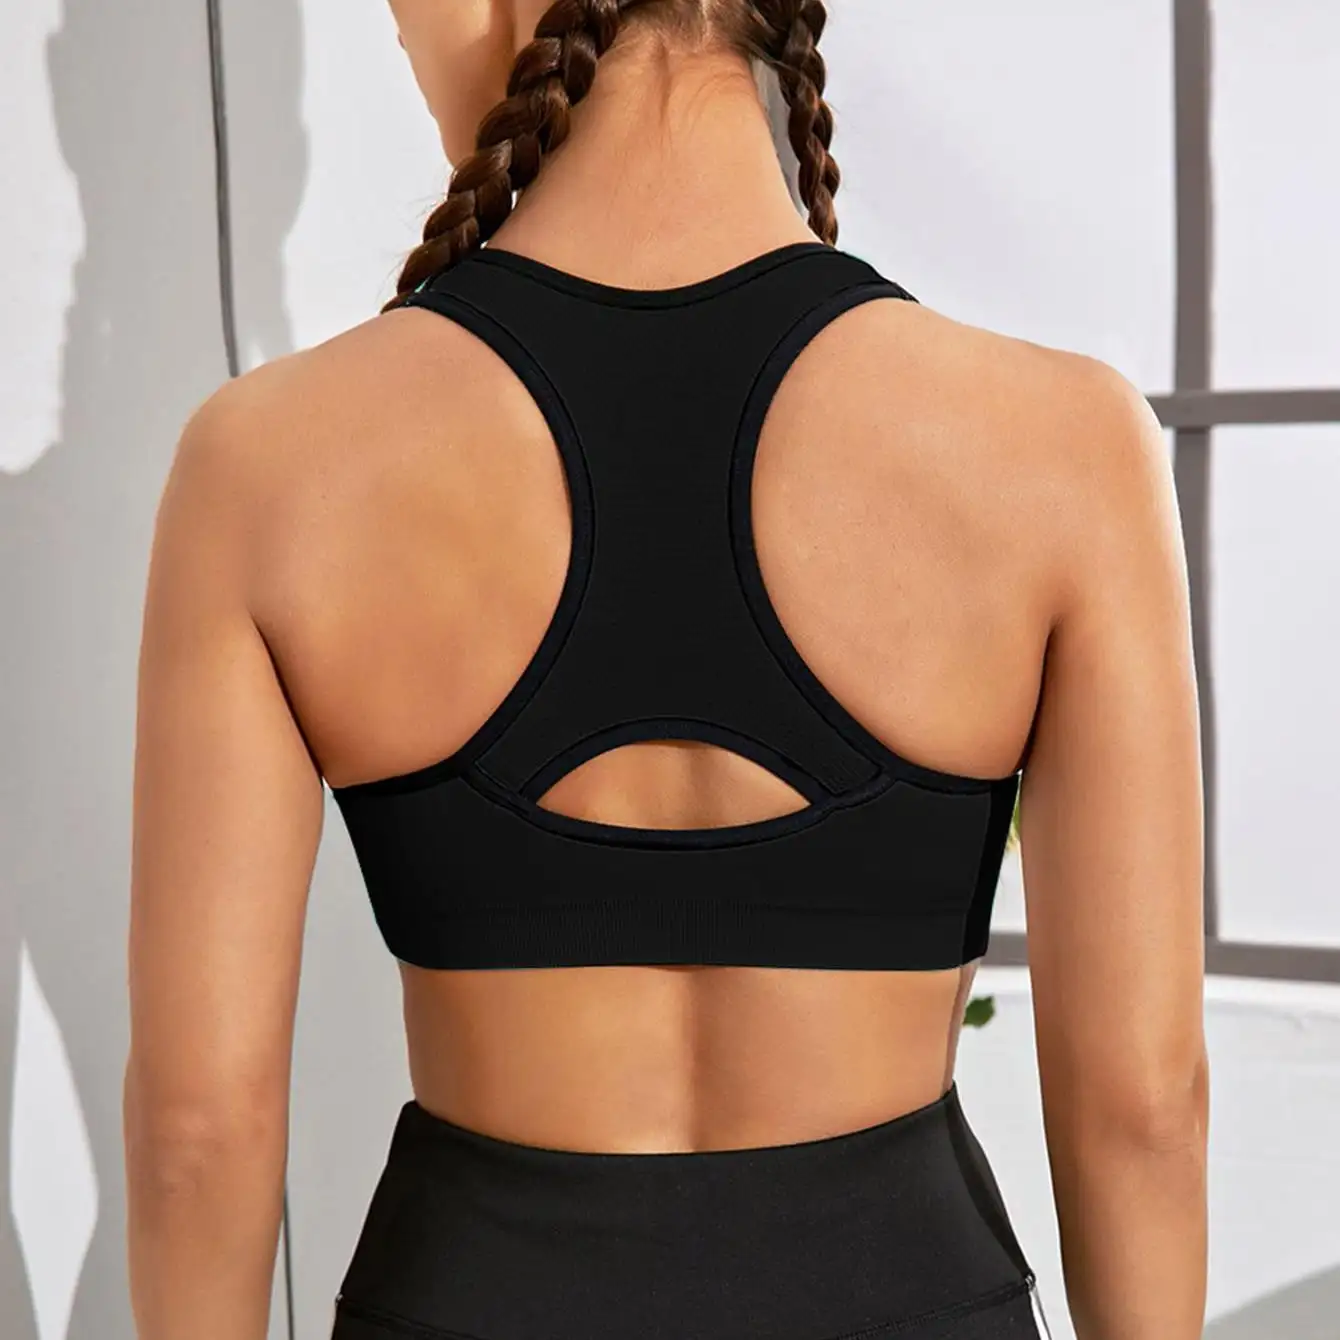 high performance Sports Bras for Women High Impact Support Workout Bra training high quality yoga bra tops new arrival high-